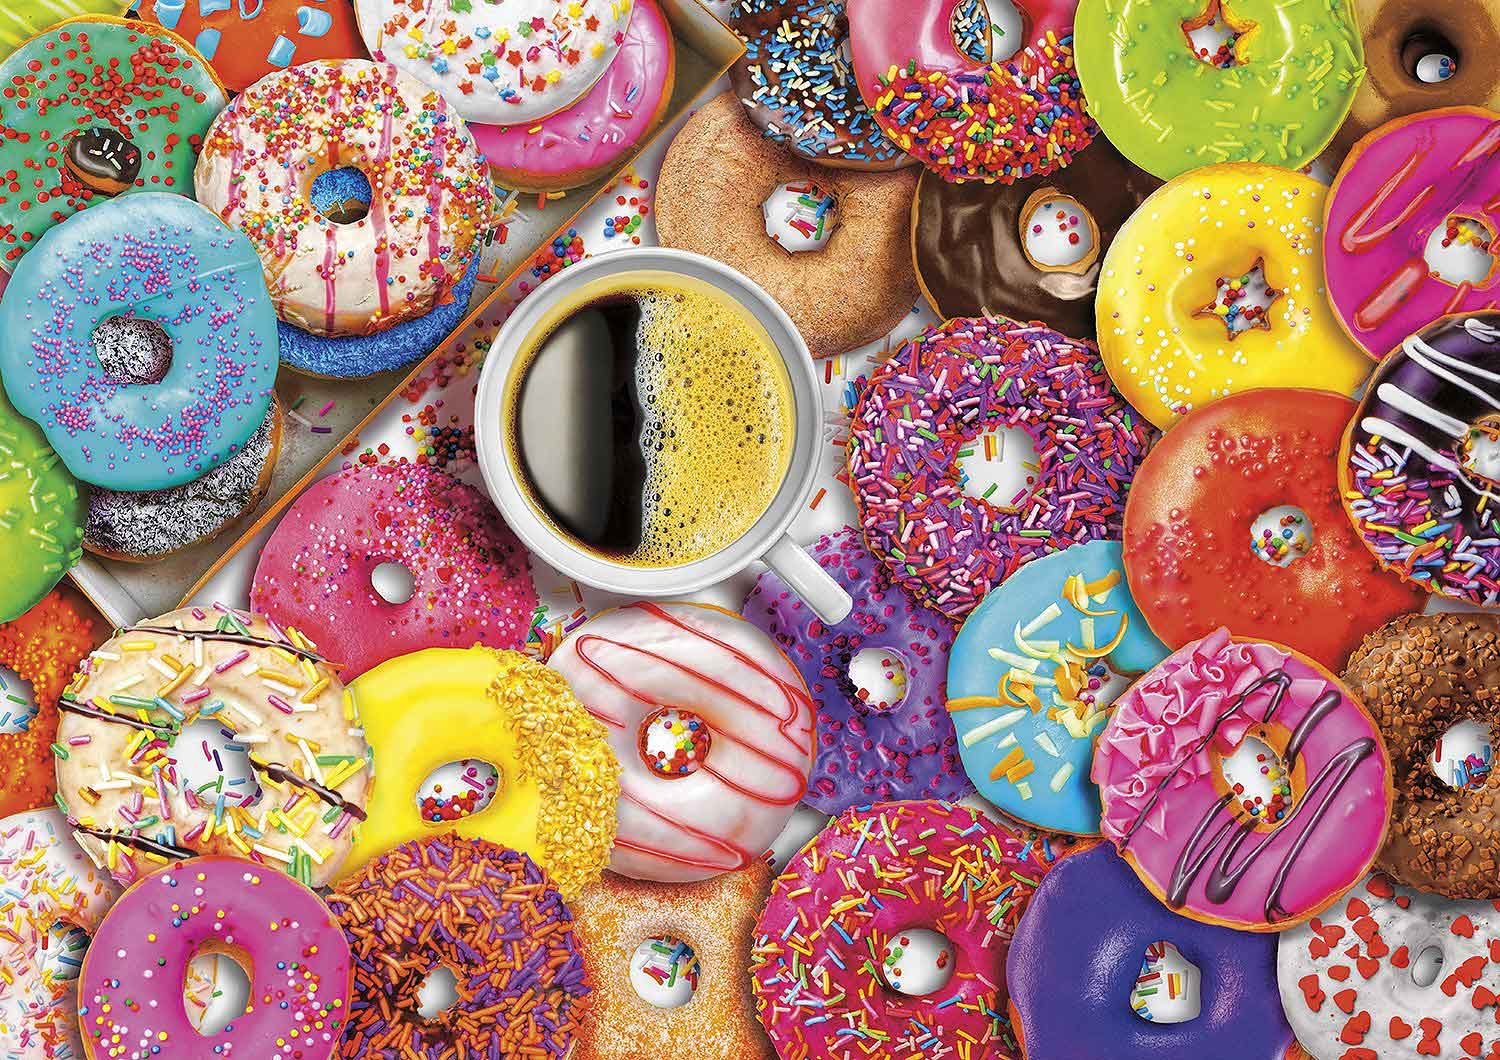 10 Fun Donut Gifts For Serious Donut Lovers